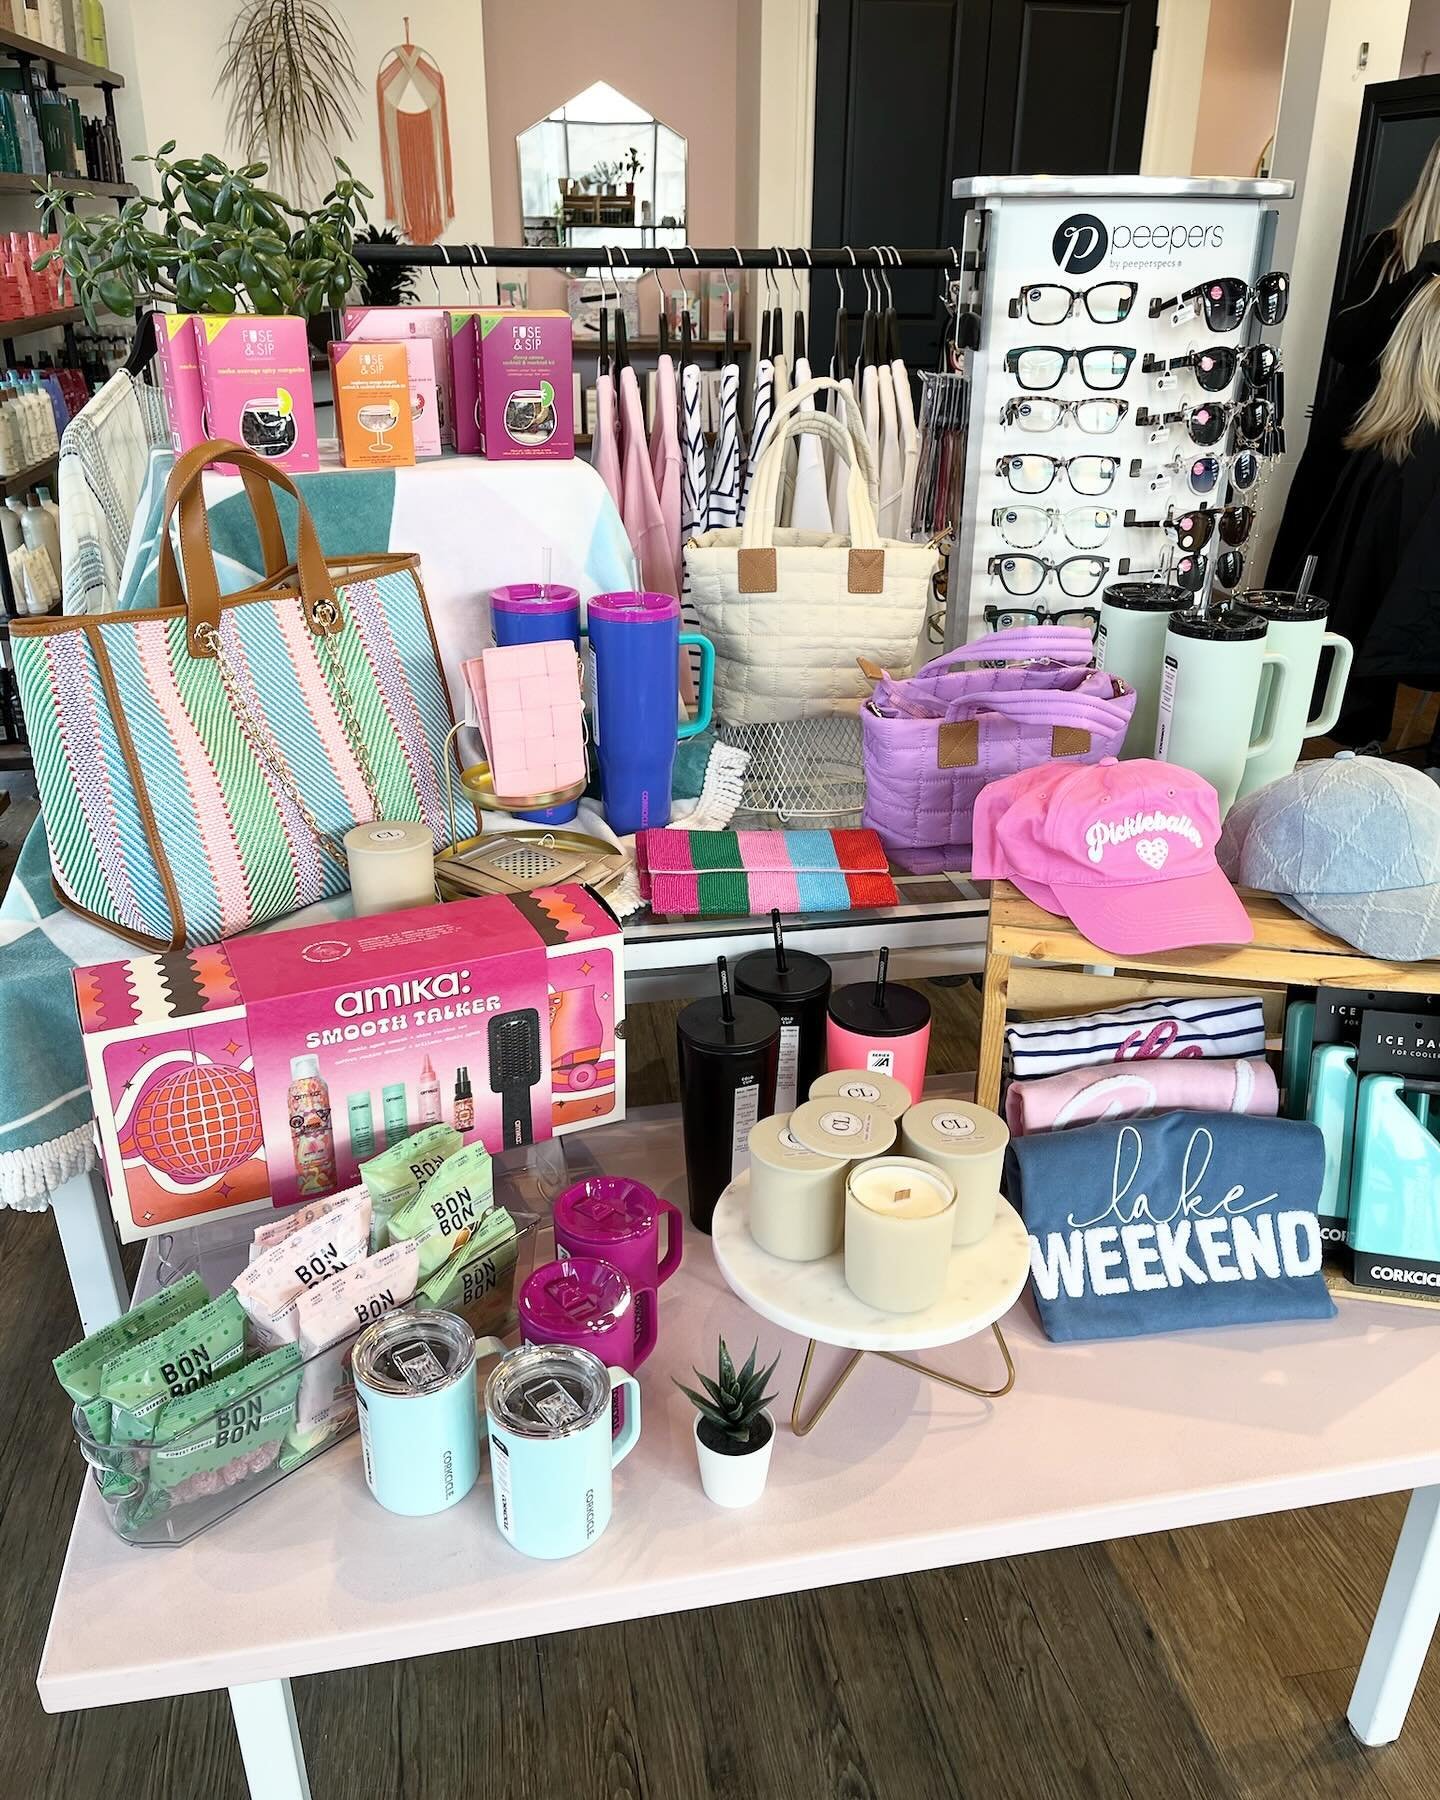 Whenever it decides to get nice outside, we are ready ☀️🍉🕶️⛱️🥤

Front table display featuring brands:
@corkcicle
@amika
@peepers
@fuseandsip
@salt._.collective
and lots more! Come in to check them out.
___
Red Deer hair salon &bull; Copper Lane Ha